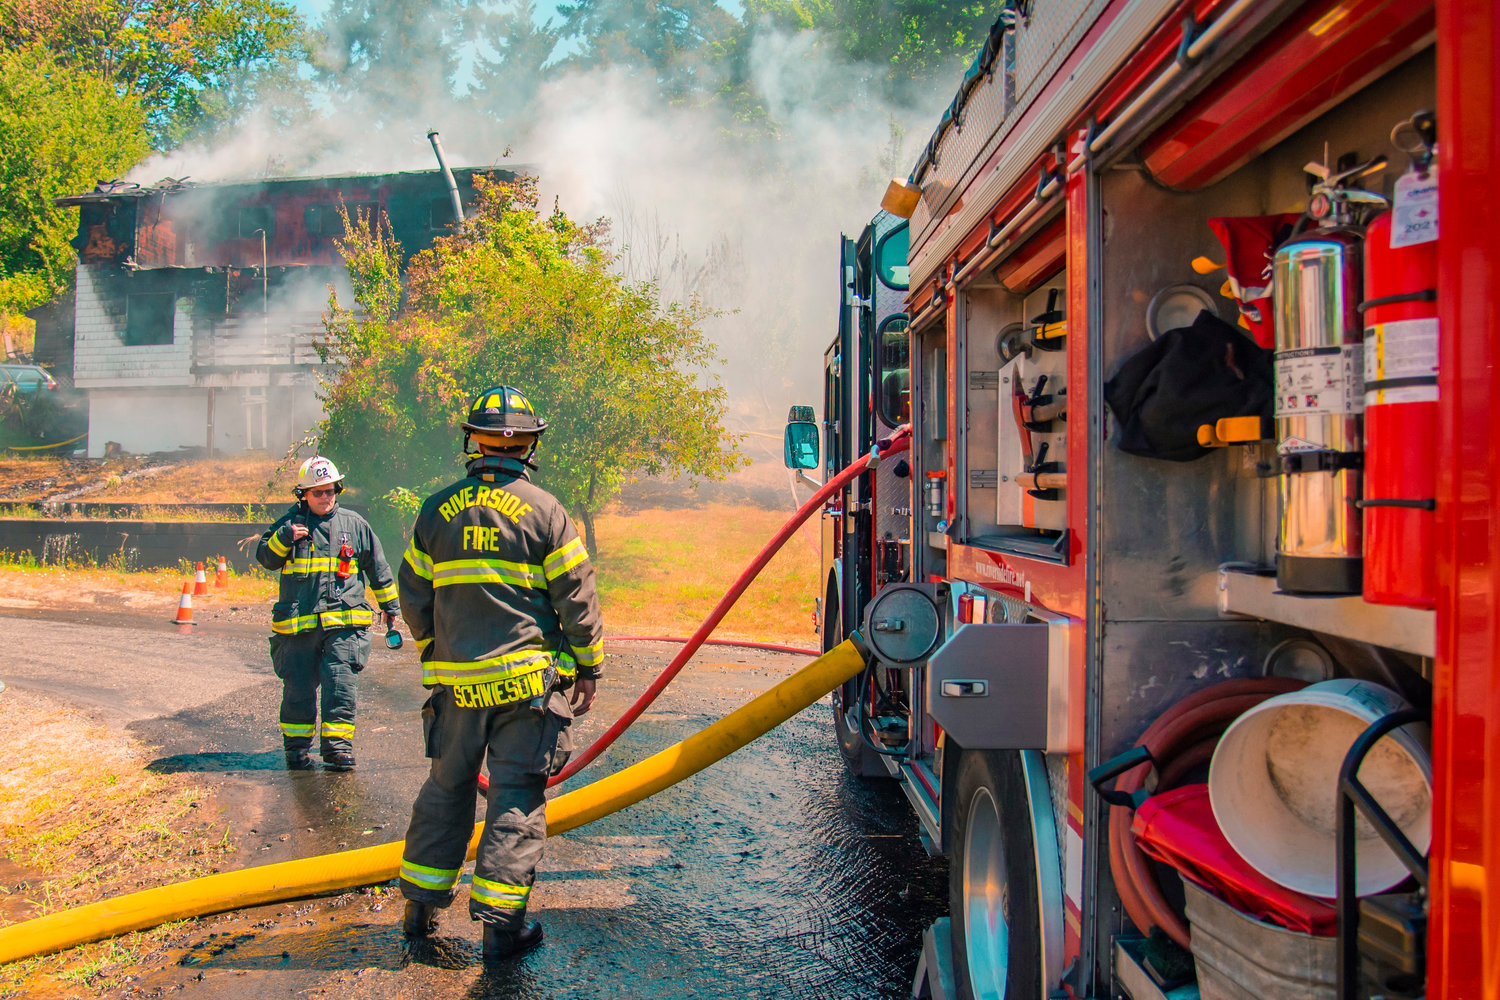 Riverside Fire Authority Assistant Chief Kevin Anderson works with firefighters to put out flames at a residential structure on East Third Street in Centralia on Thursday.